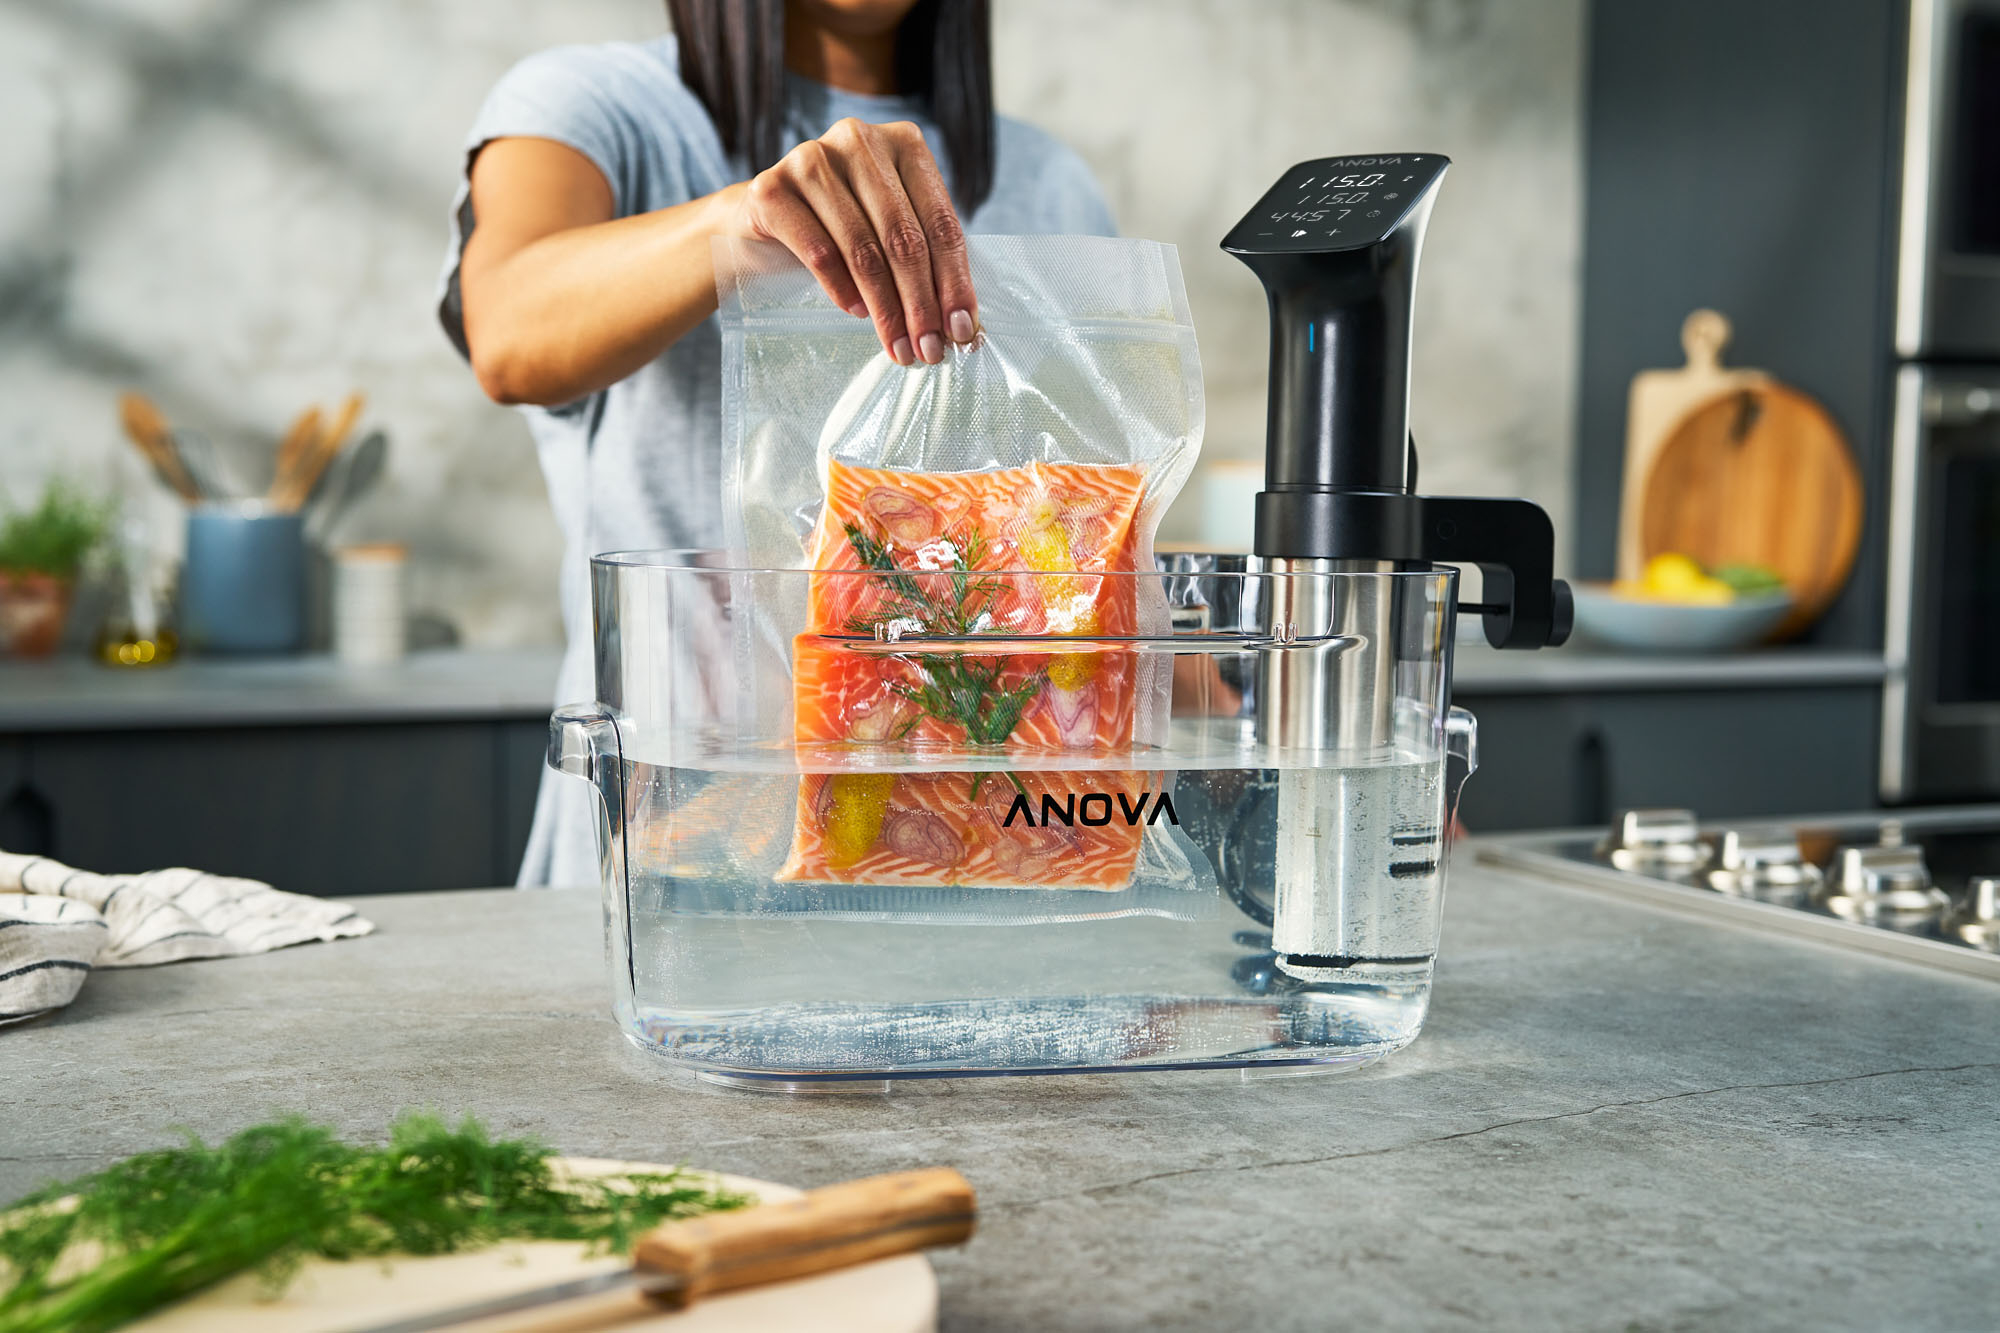 ANOVA Precision Cooker Pro (WiFi) Black and Silver Sous Vide with Anova App  AN600-US00 - The Home Depot